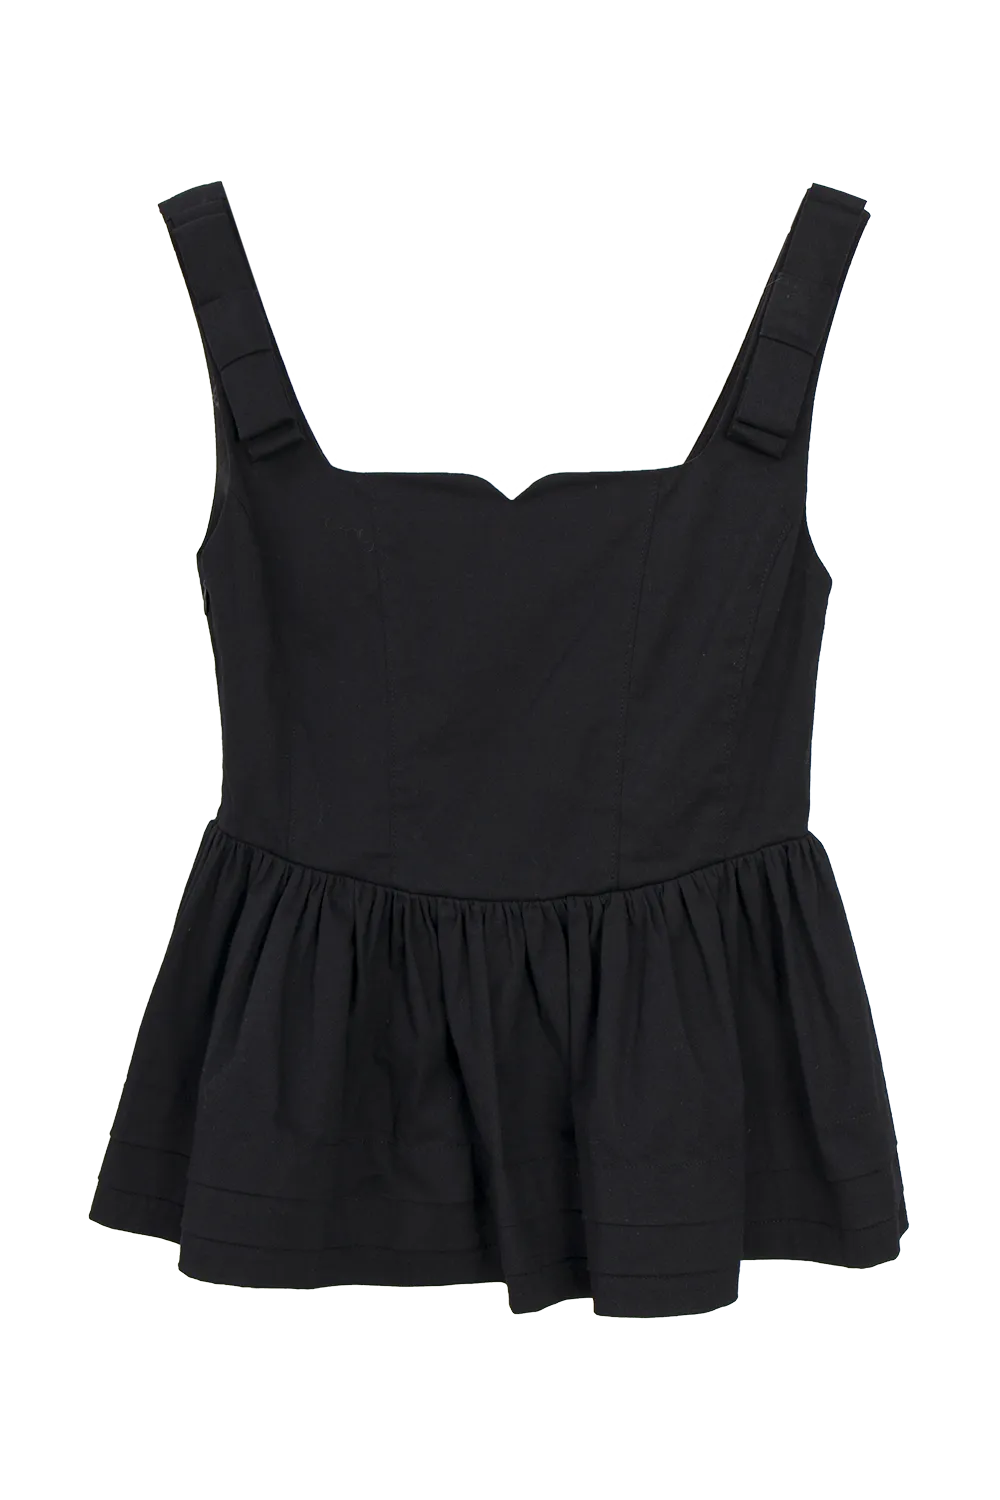 Chic Square Neck Peplum Top with Ruffle Hem and Adjustable Straps